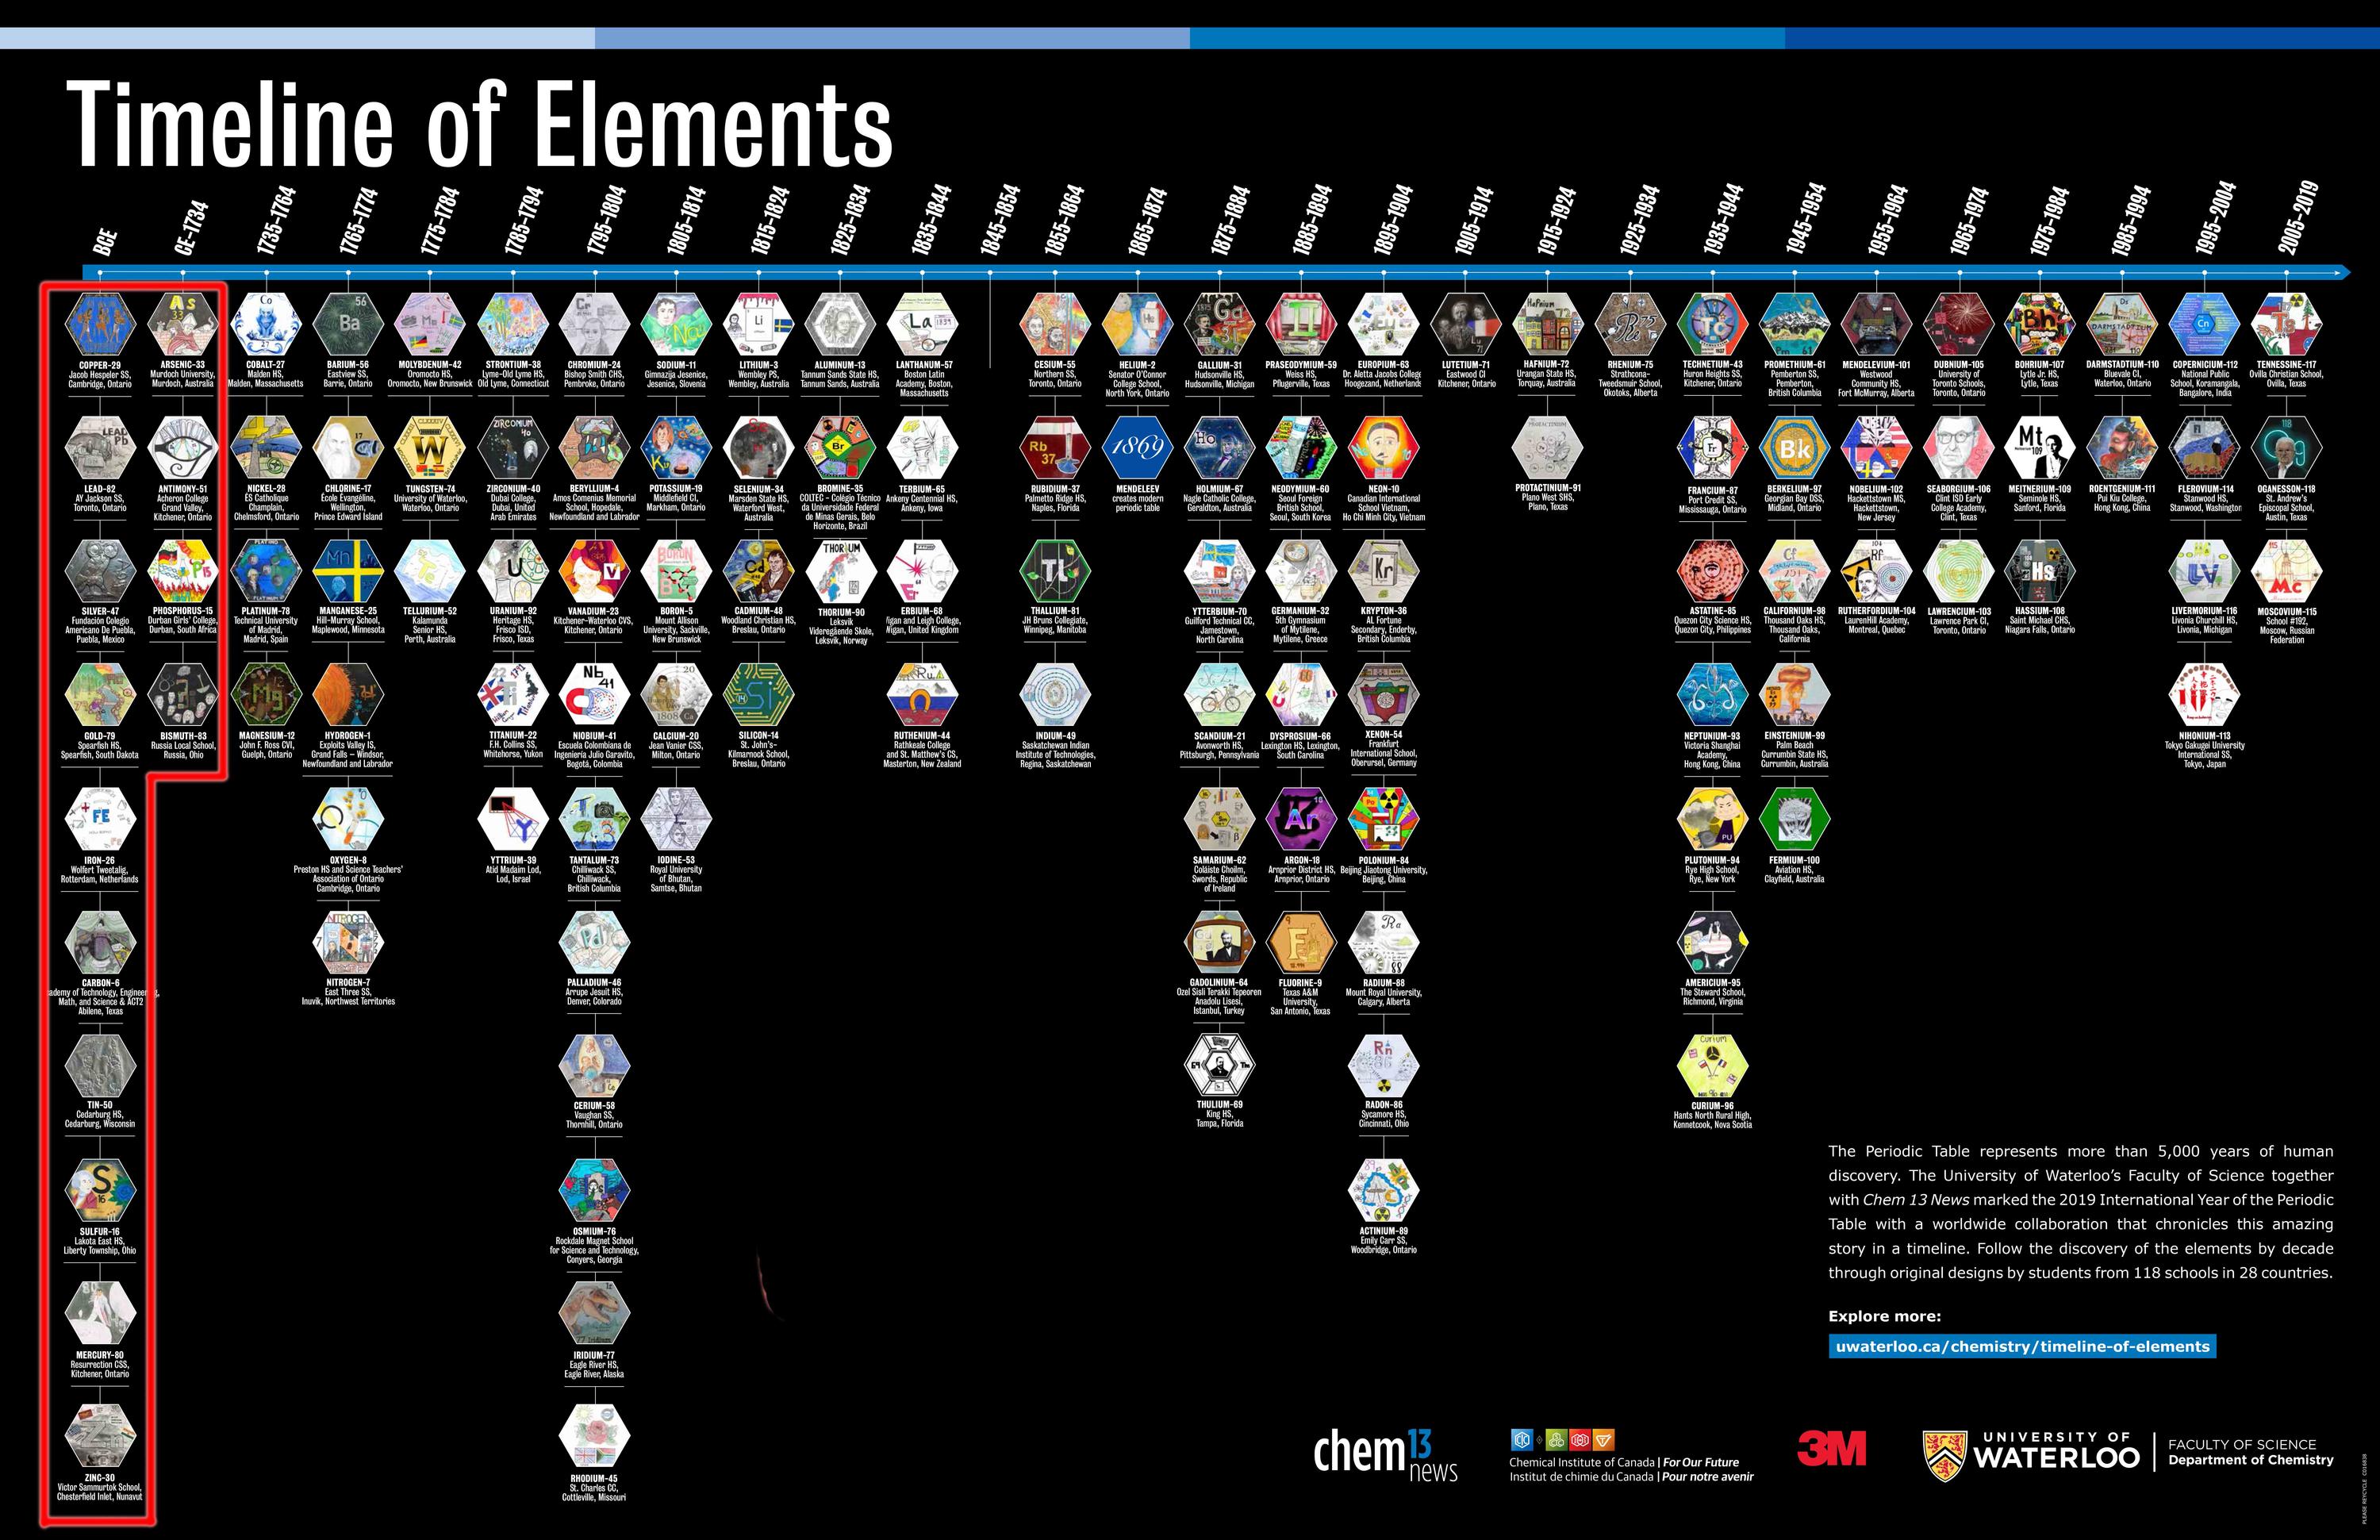 timeline of elements by decades with the elements in BCE and CE-1734 blocked off in red 